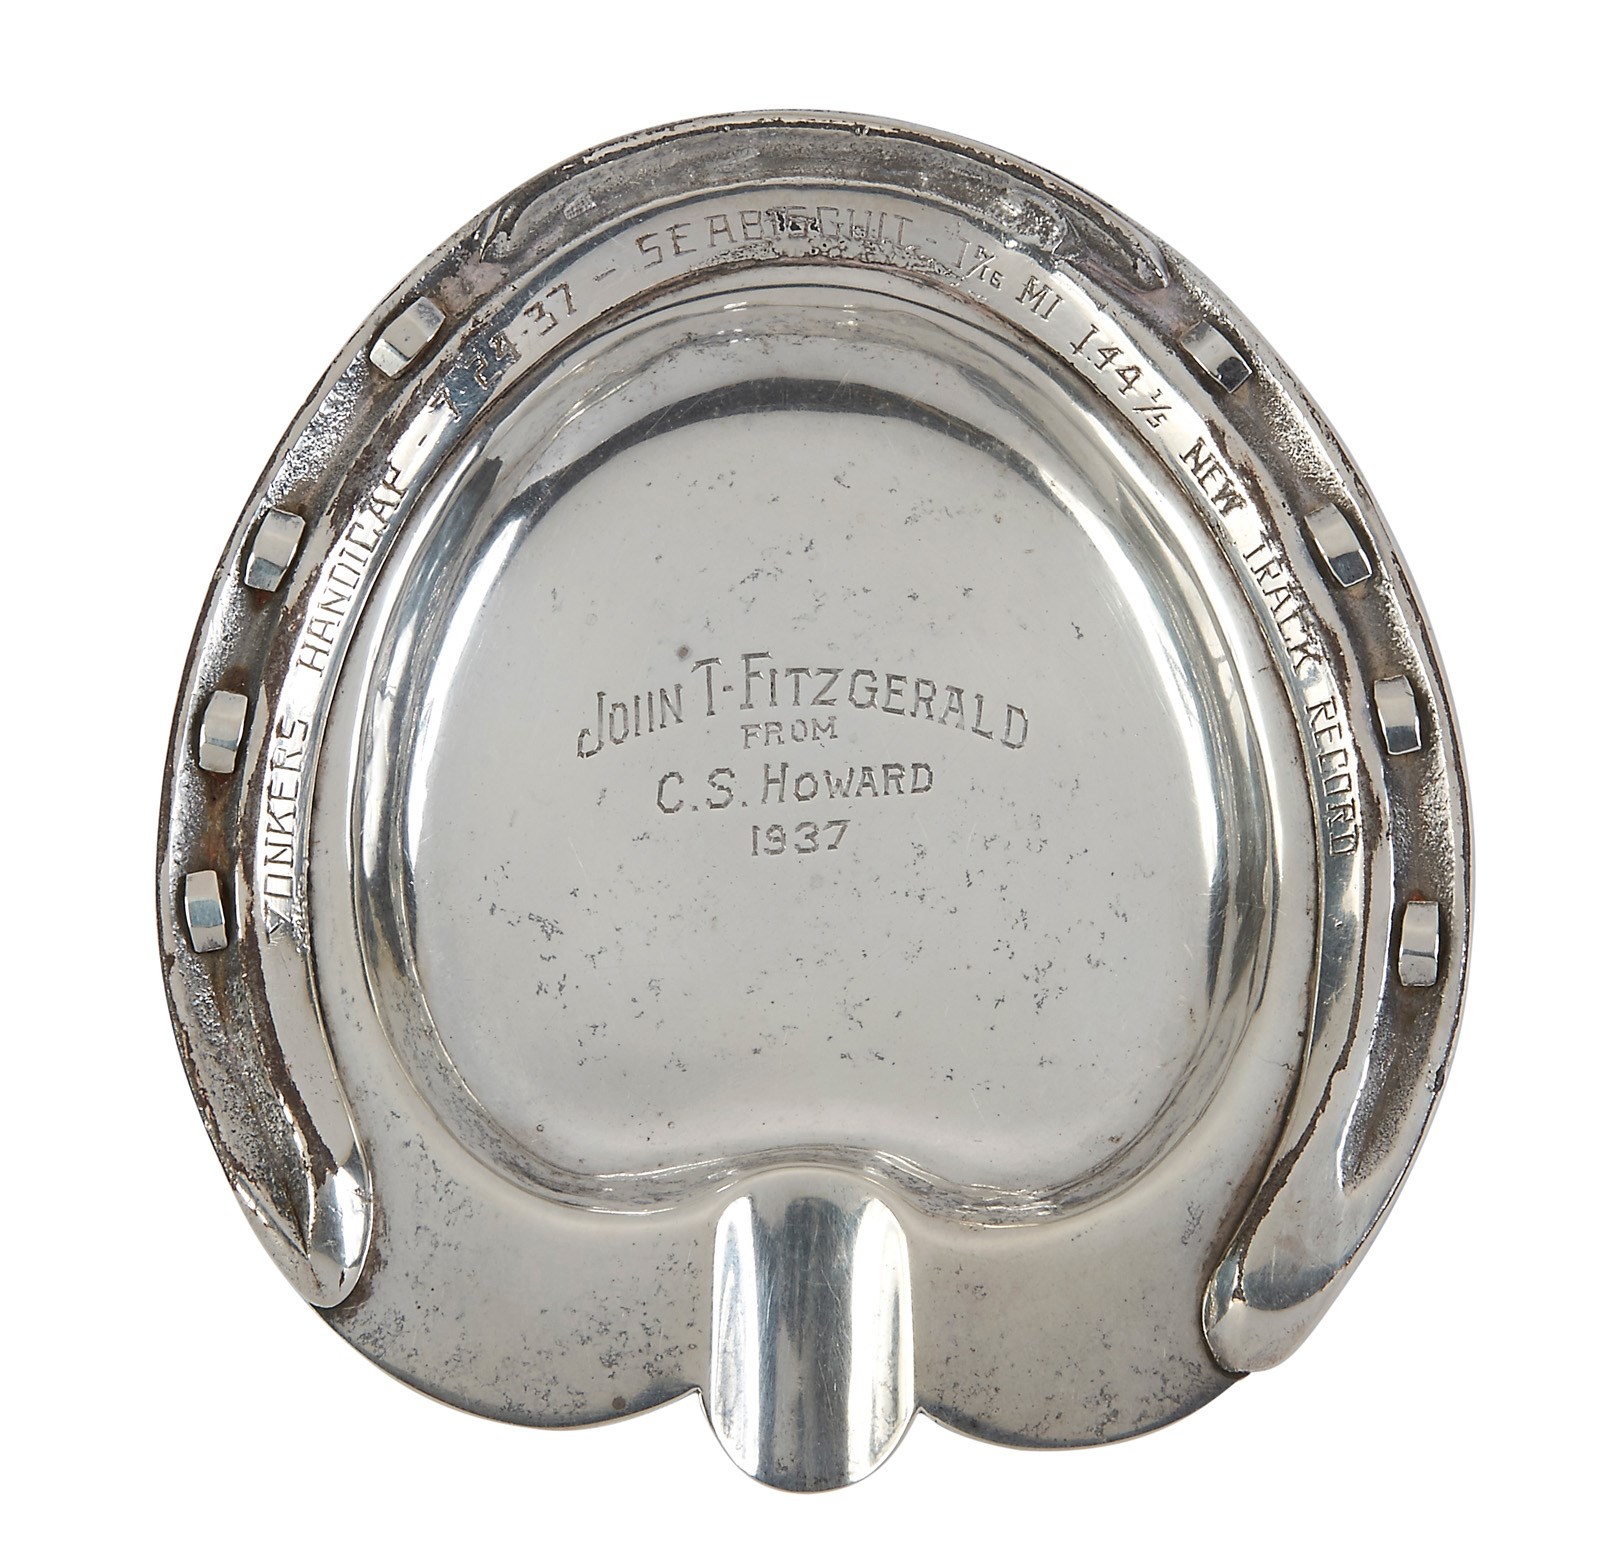 1937 Seabiscuit Race-Worn Horseshoe Silver Ashtray Gifted by C.S. Howard